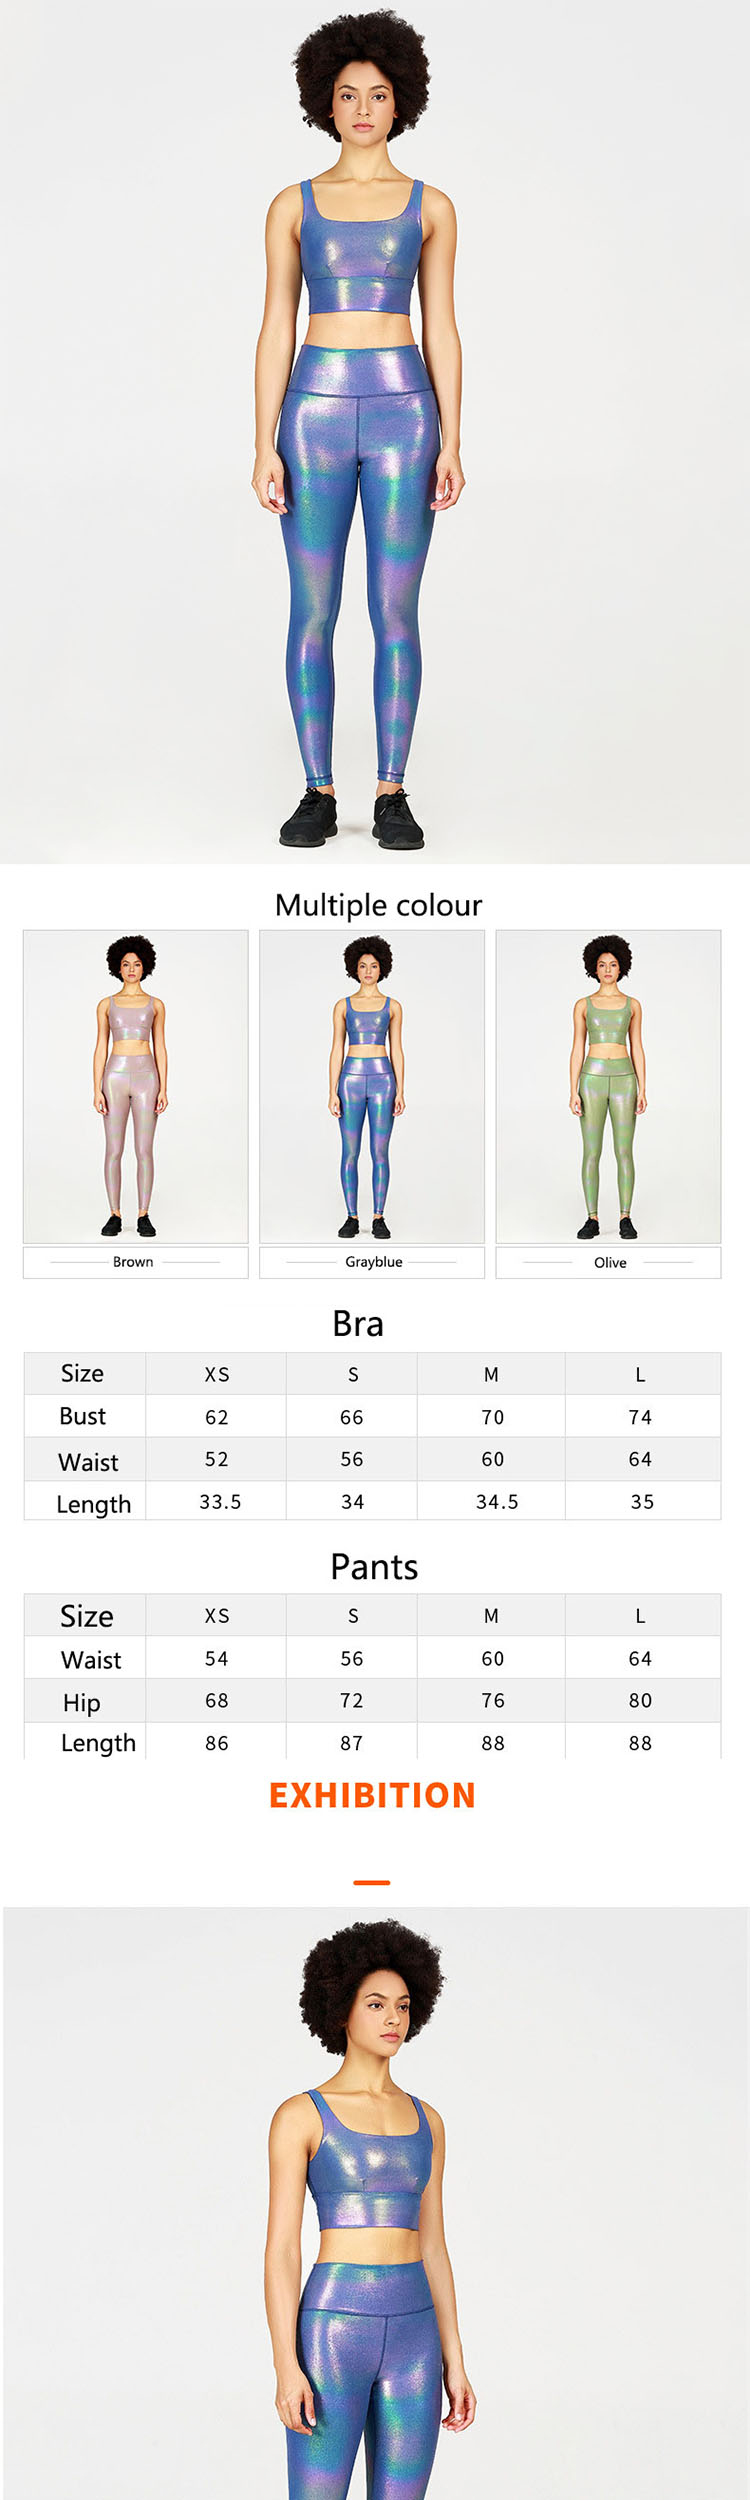 Yoga trousers womens uses large and small yarns to form a horizontal texture style